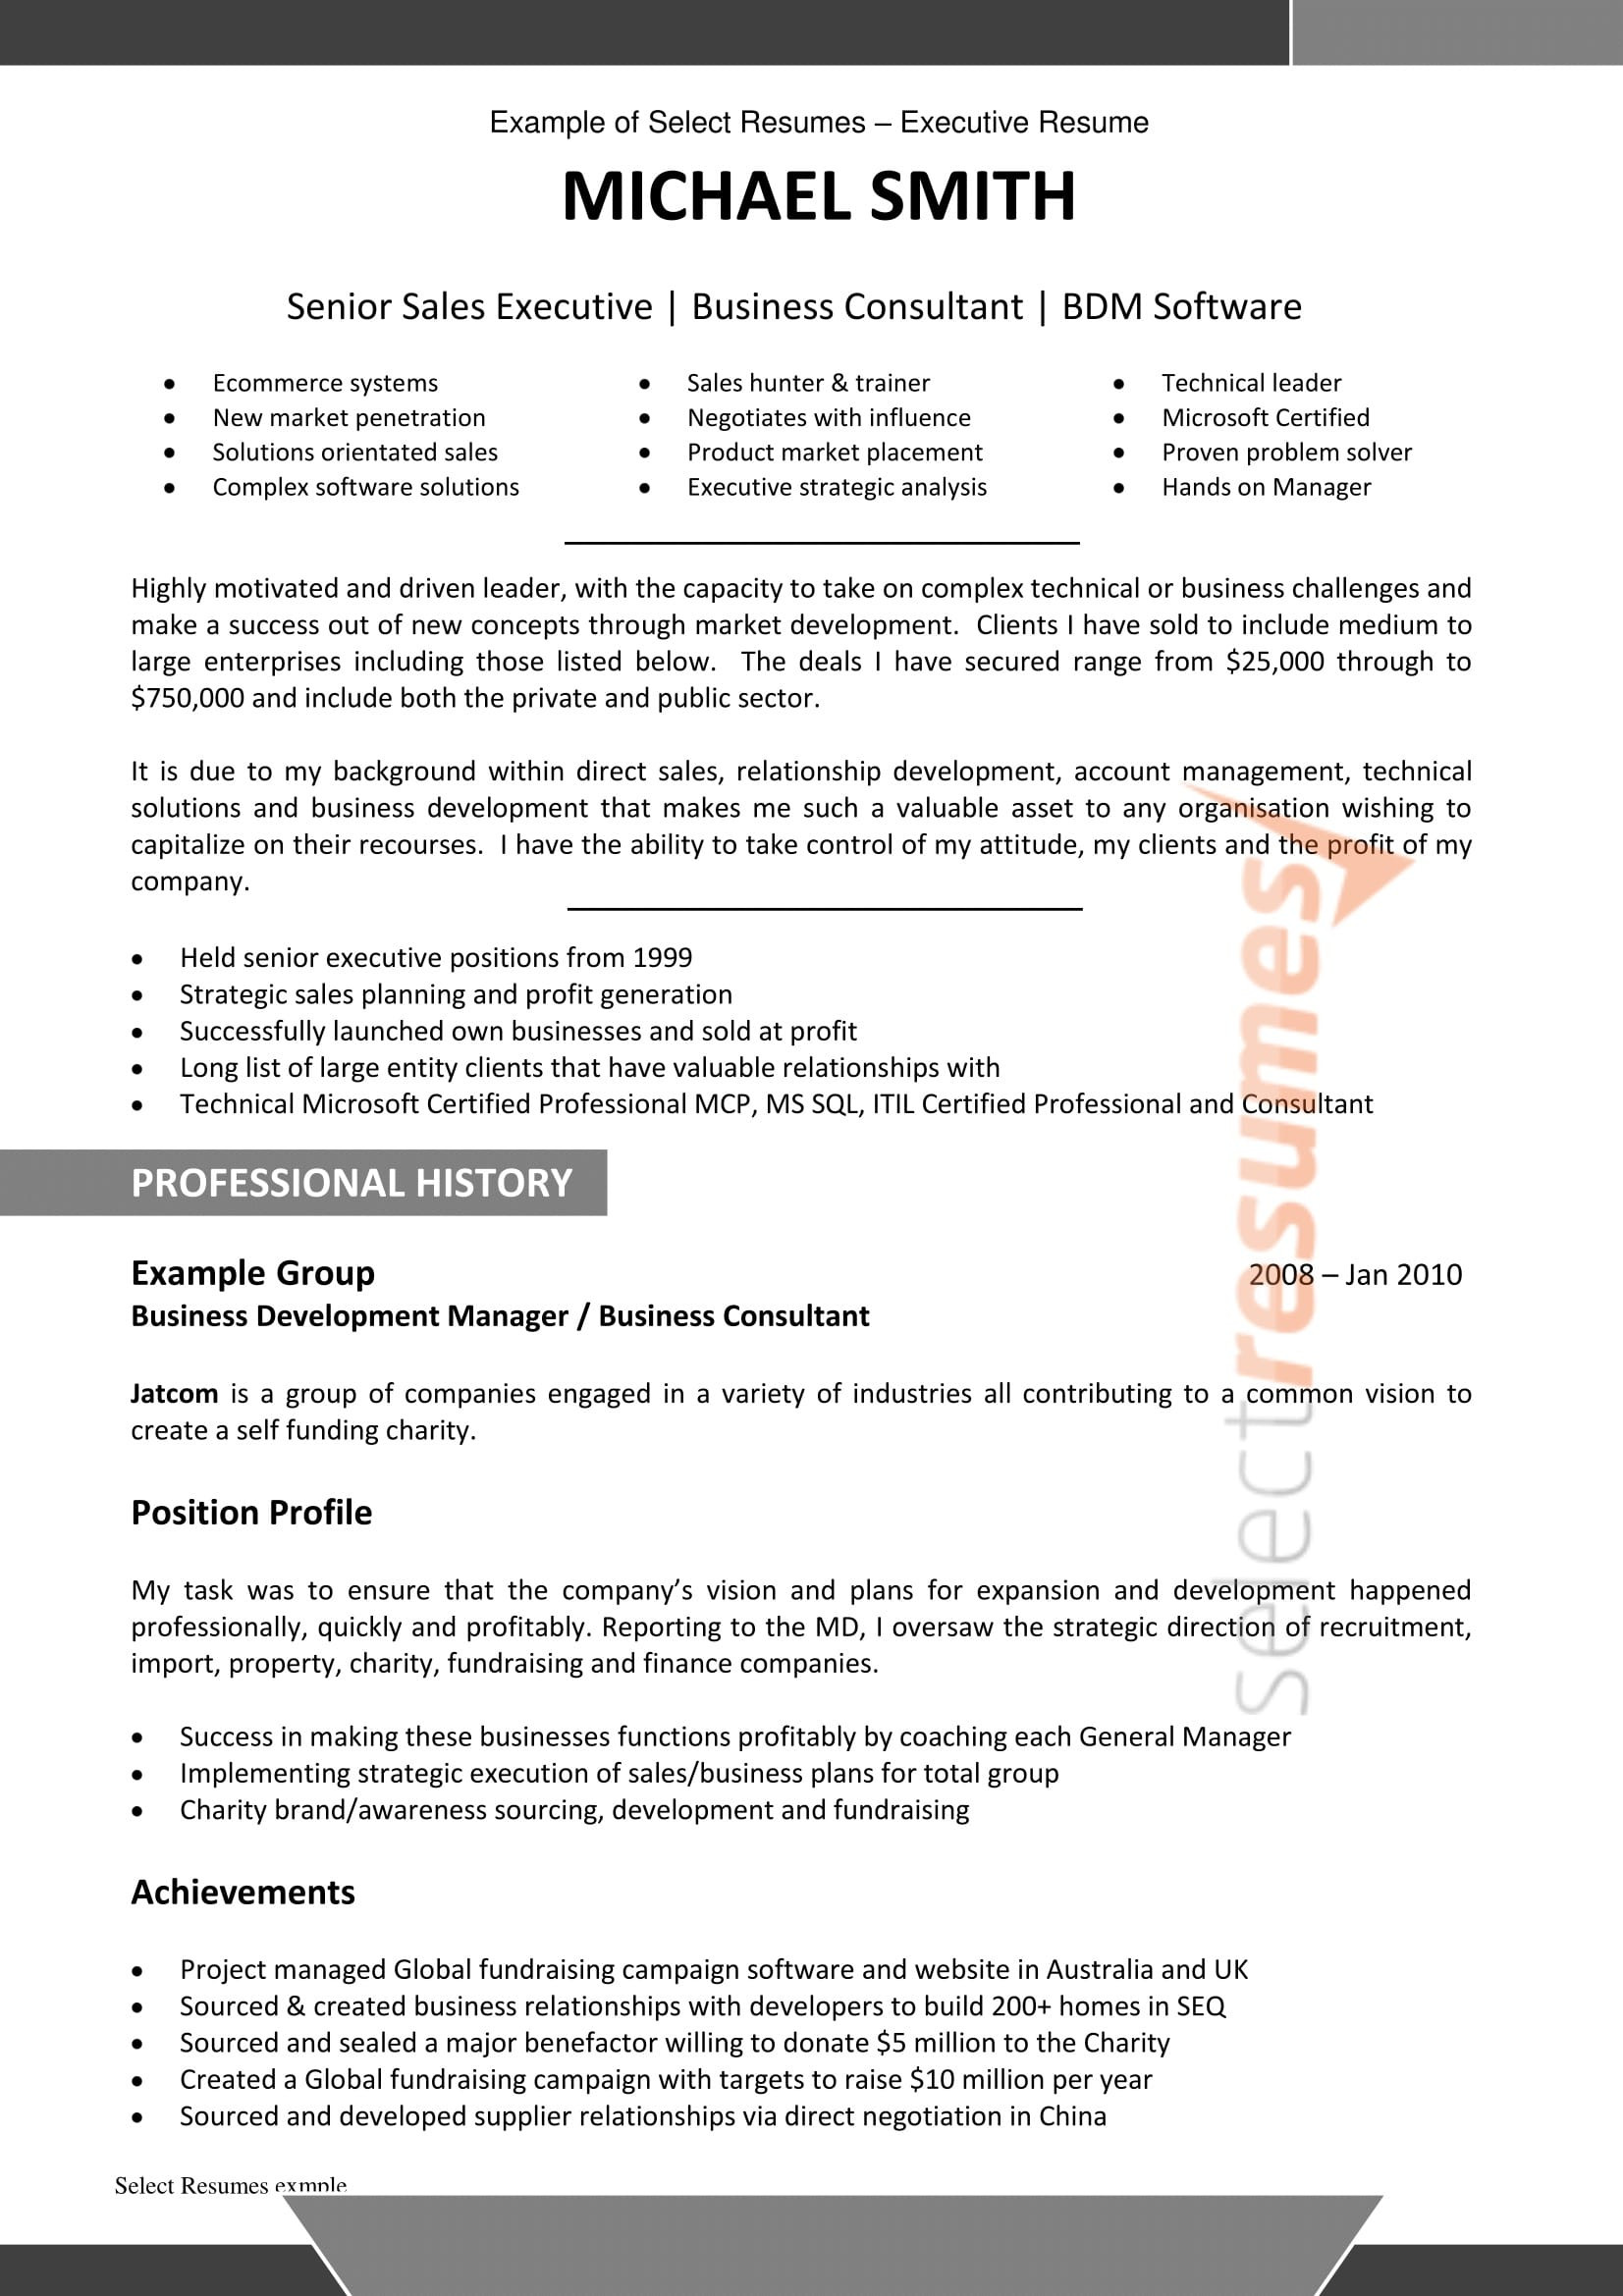 Sample Resume for Government Jobs Australia Public Sector Resume Writing Service – Select Resumes